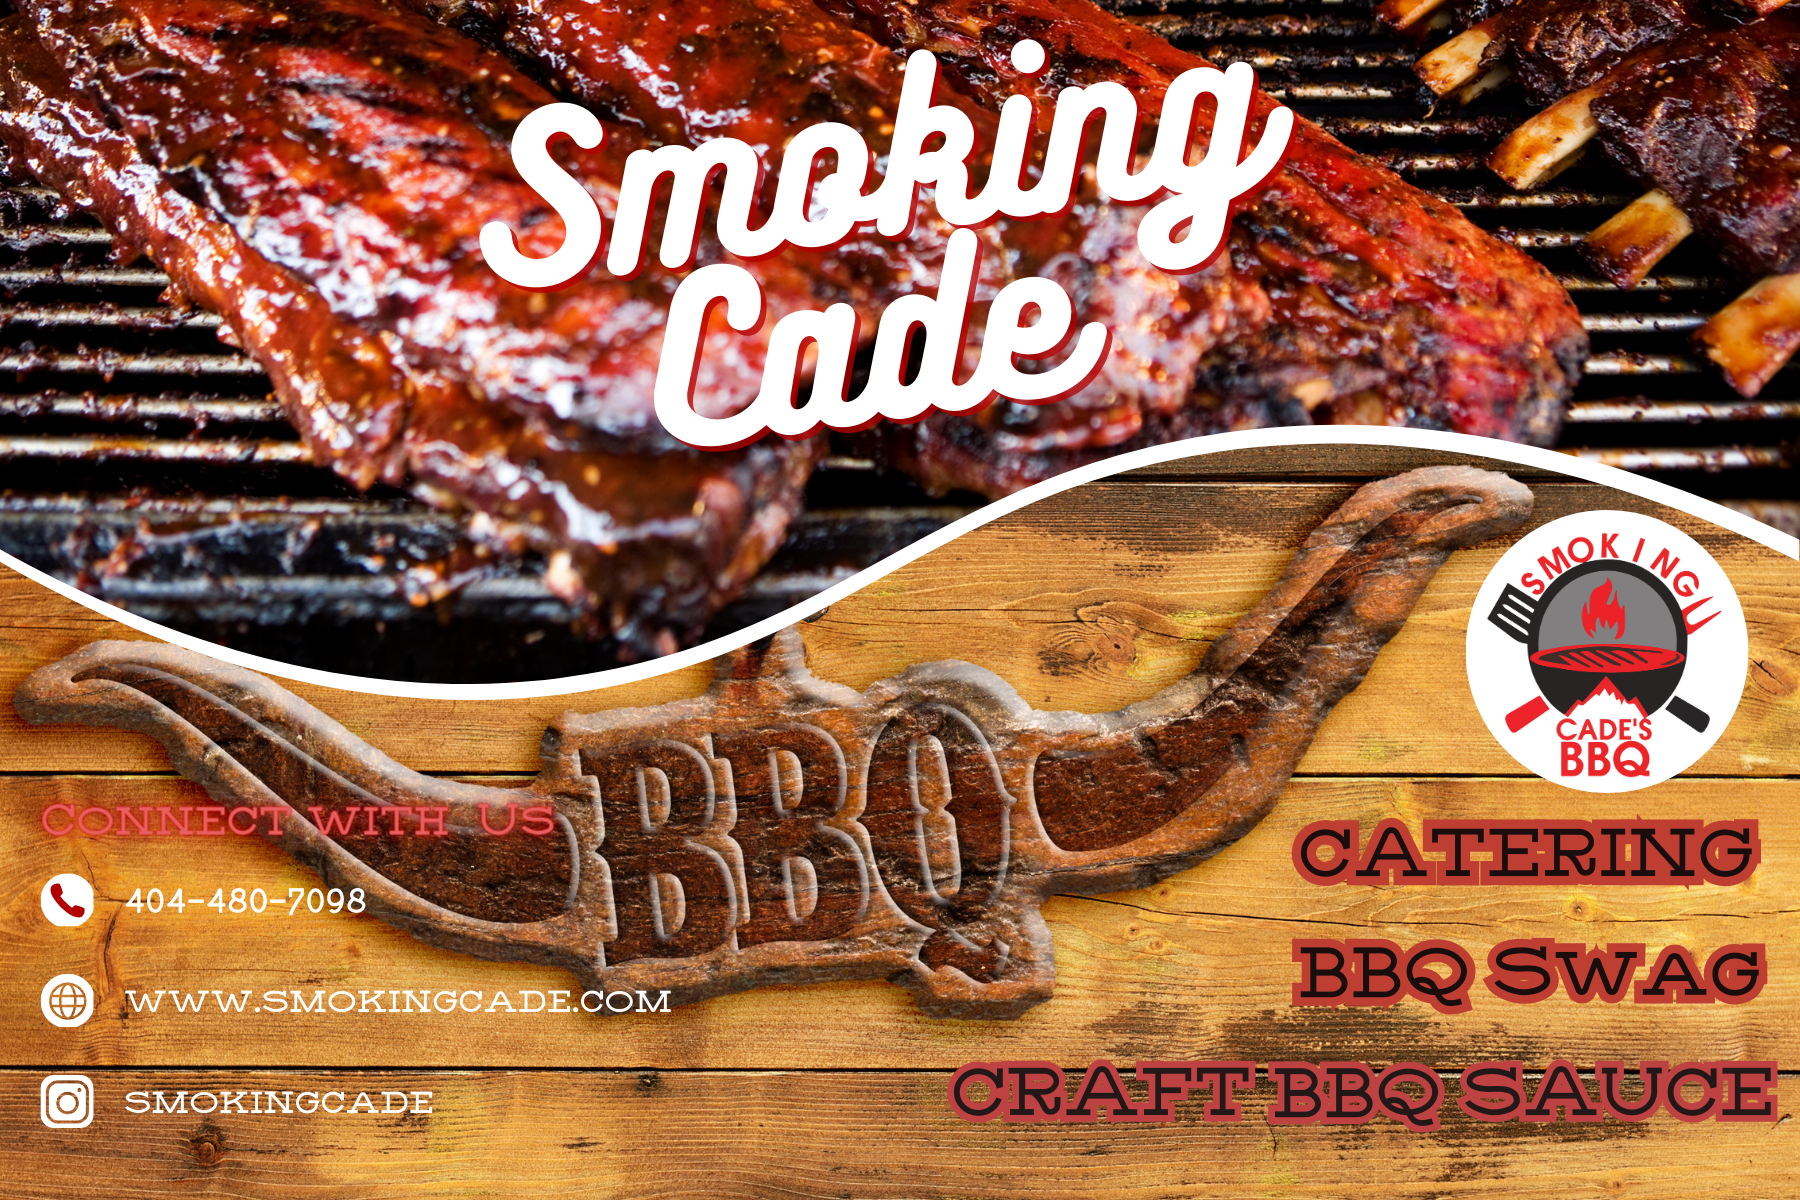 Featured image for “Smoking Cade BBQ”